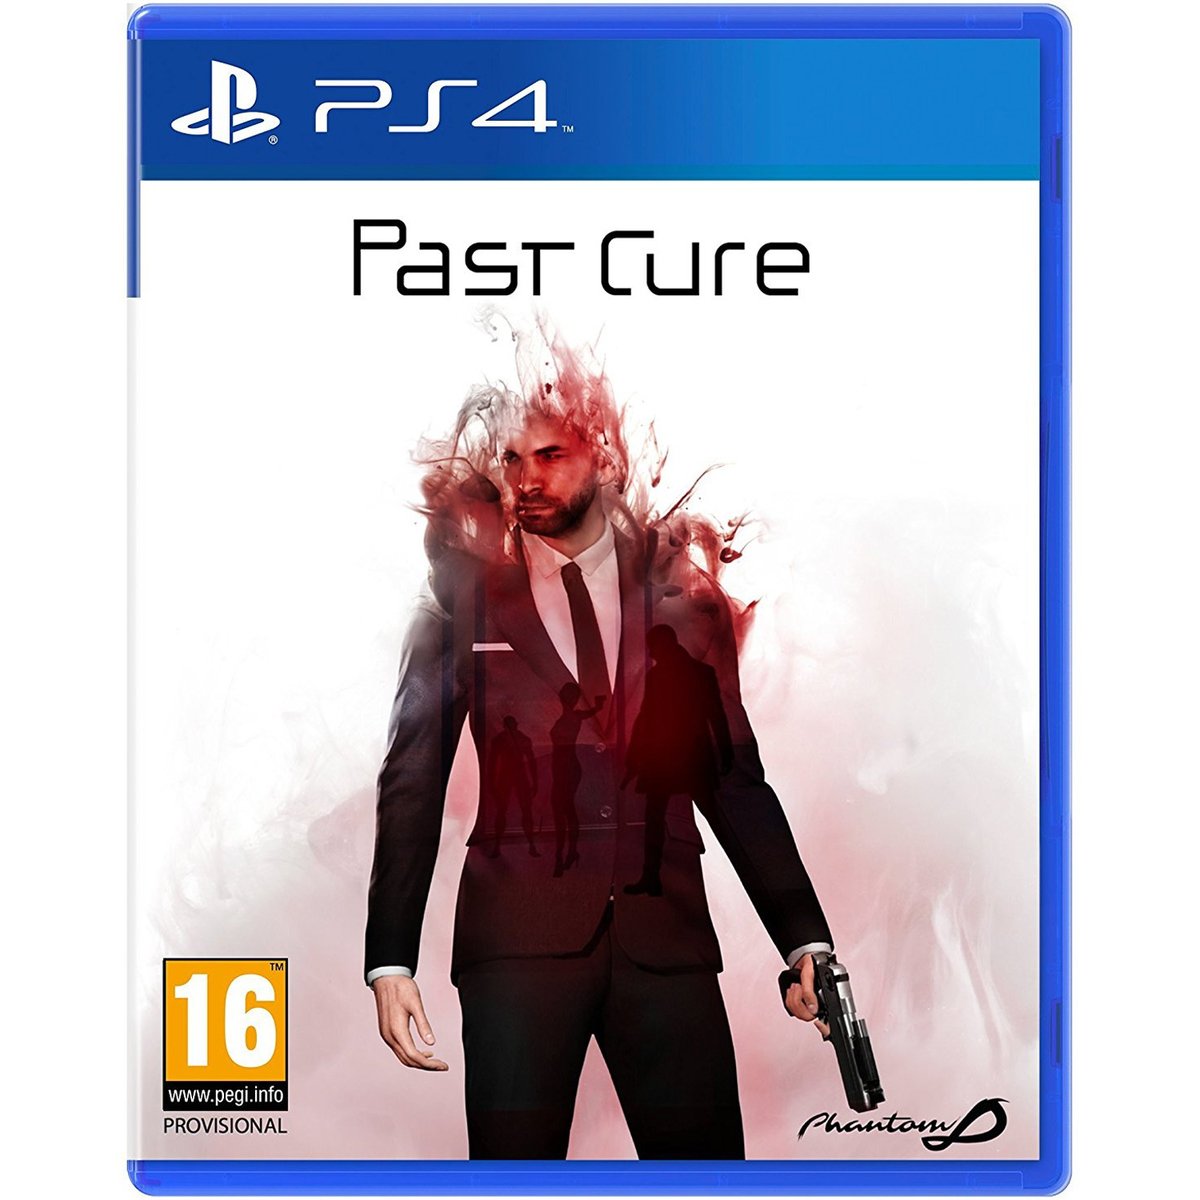 PS4 Past Cure